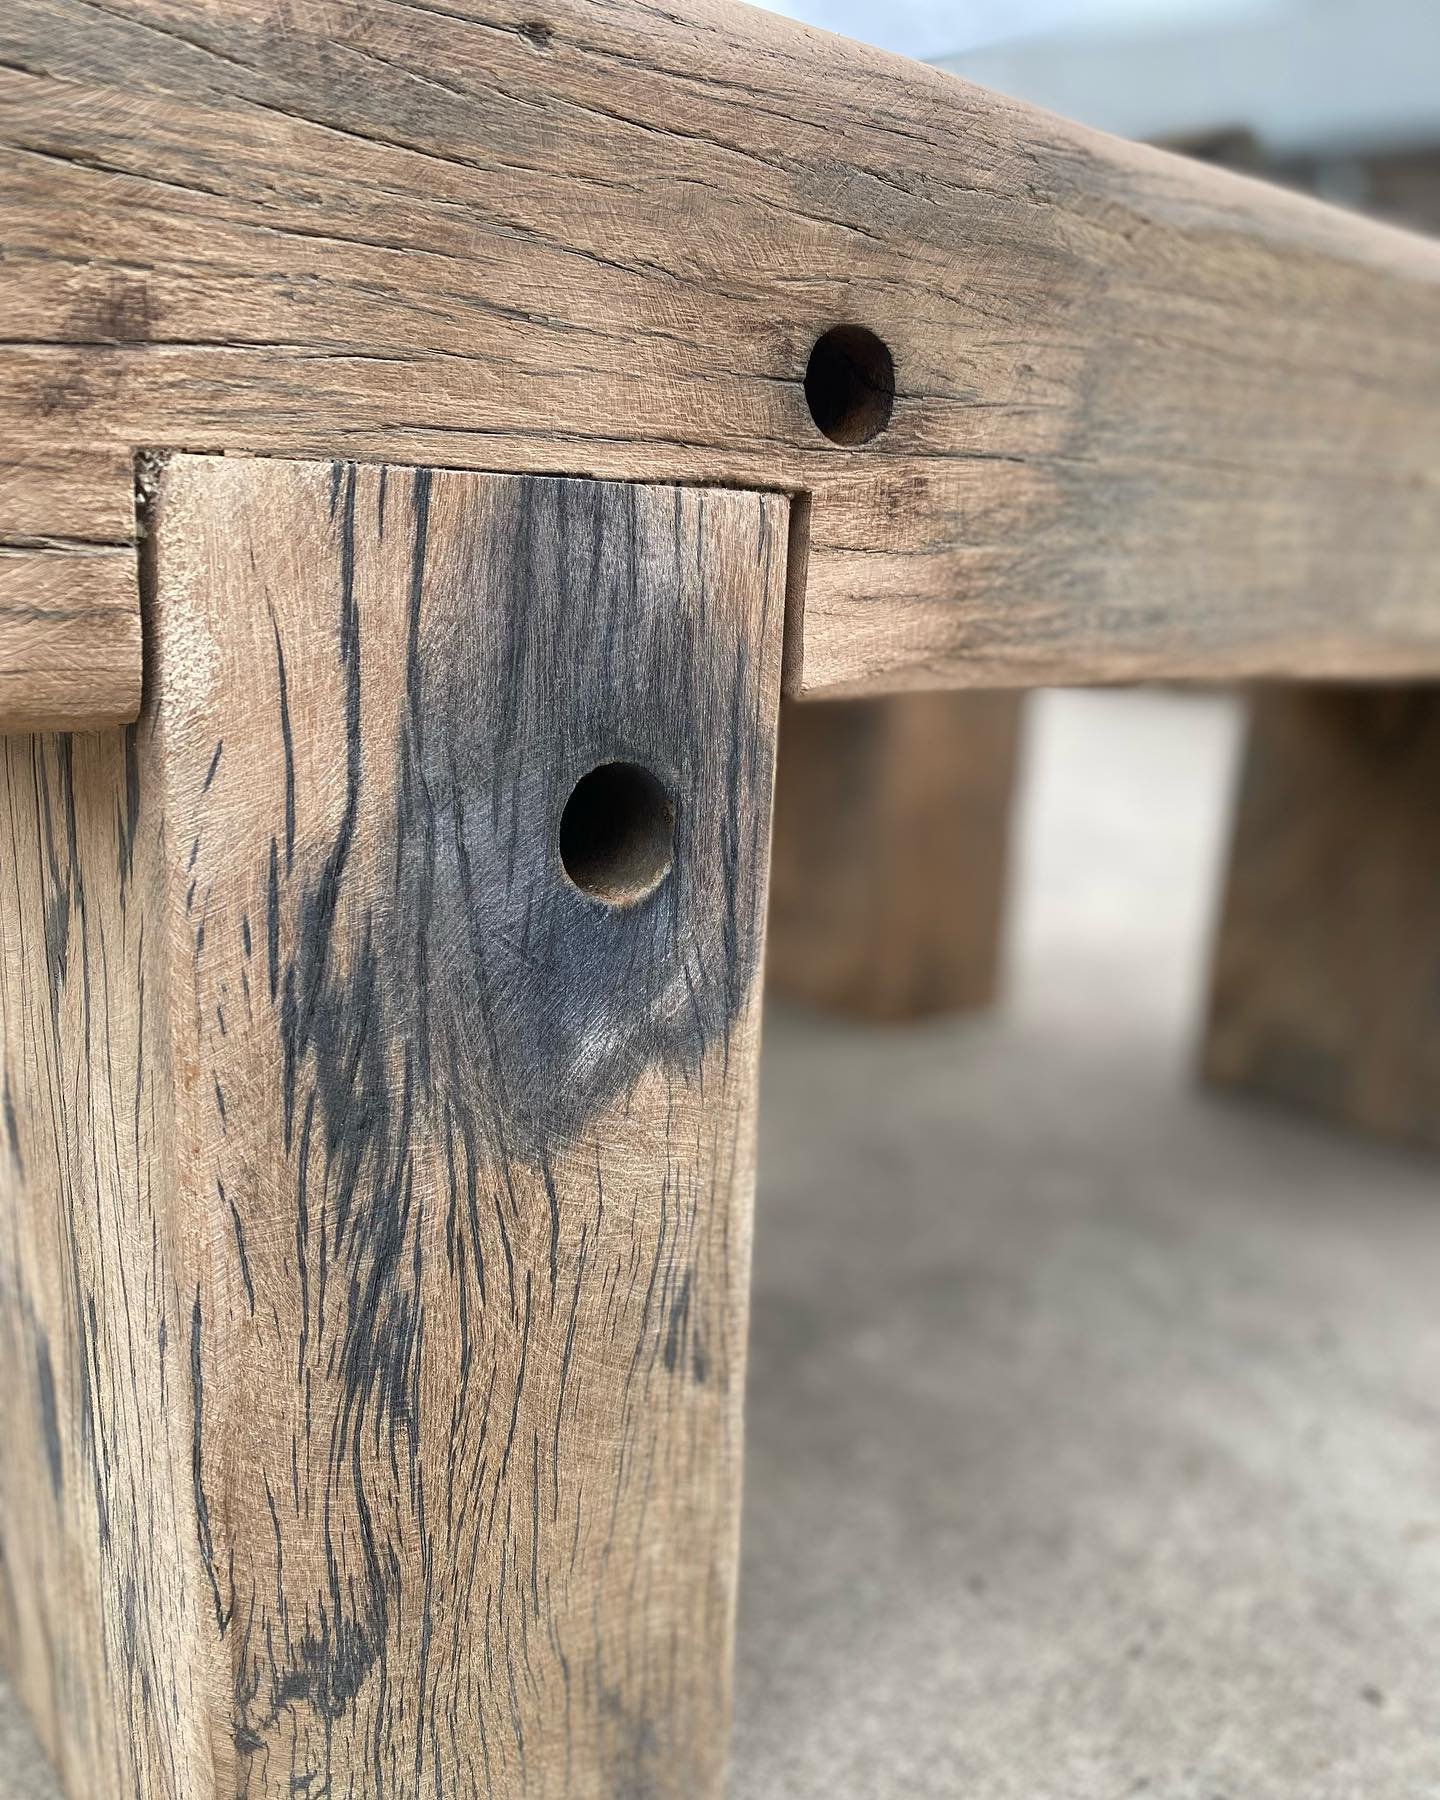 Rye Pier bench seats. We only have a limited amount of this timber left. If anyone is interested in a bespoke bench seat made from a piece of local history give us a call. 👍⚒️🌳